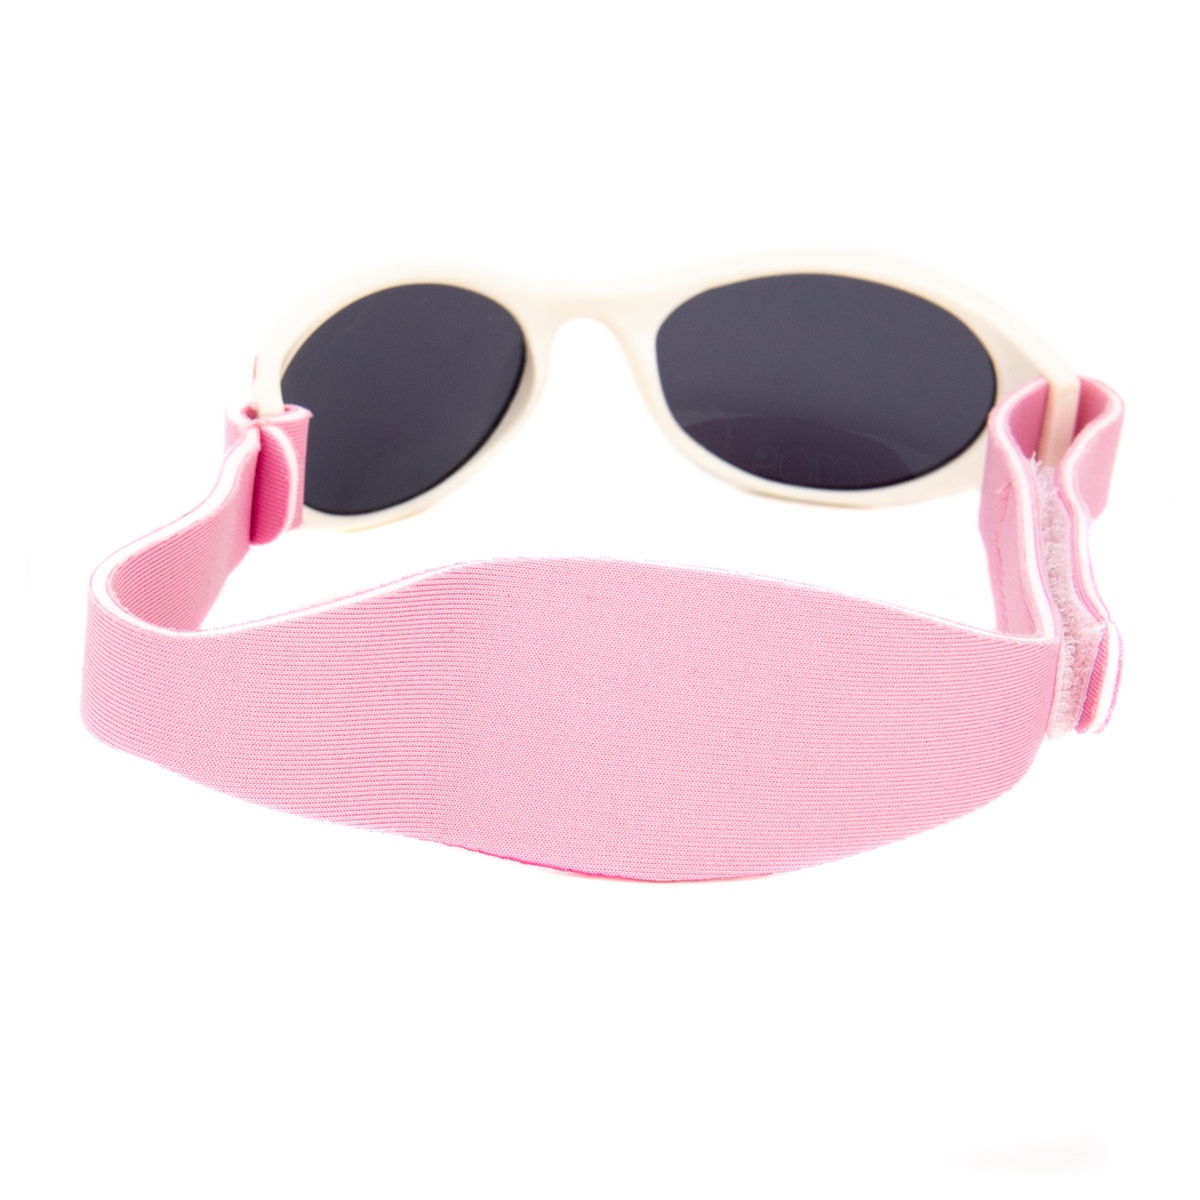 My Brittany's Pink Heart Glasses-FREE SHIPPING OVER $20